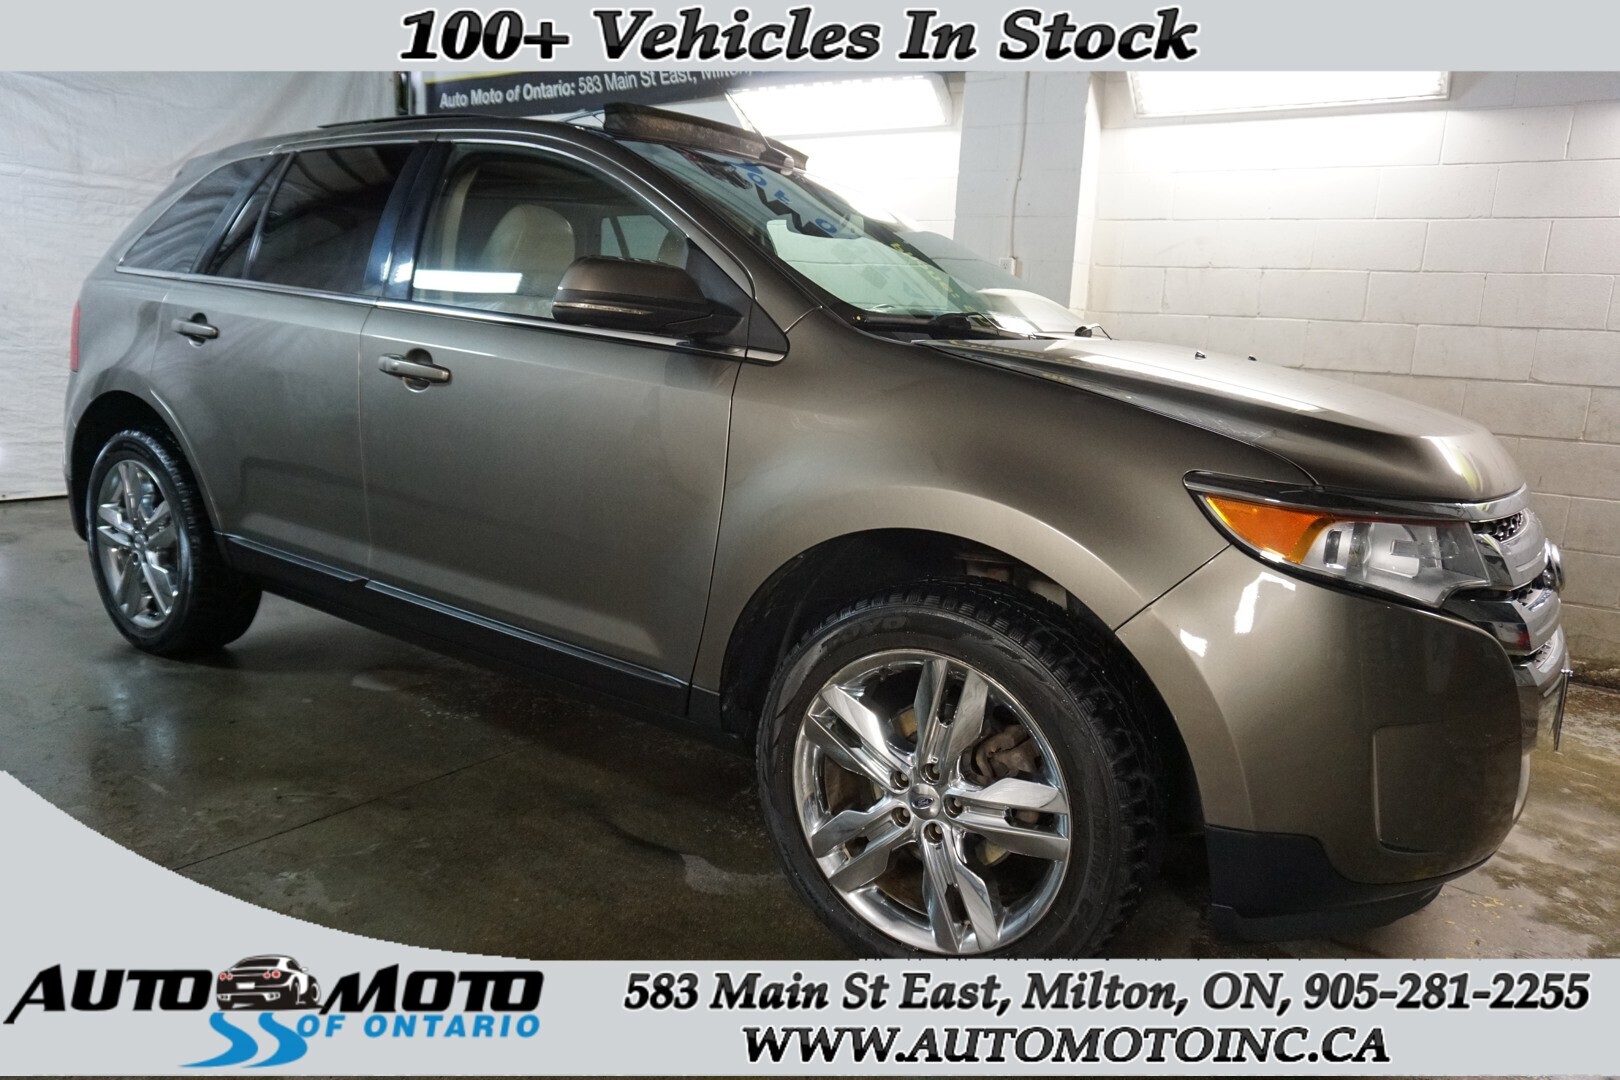 2013 Ford Edge LIMITED AWD CERTIFIED CAMERA NAV BLUETOOTH LEATHER